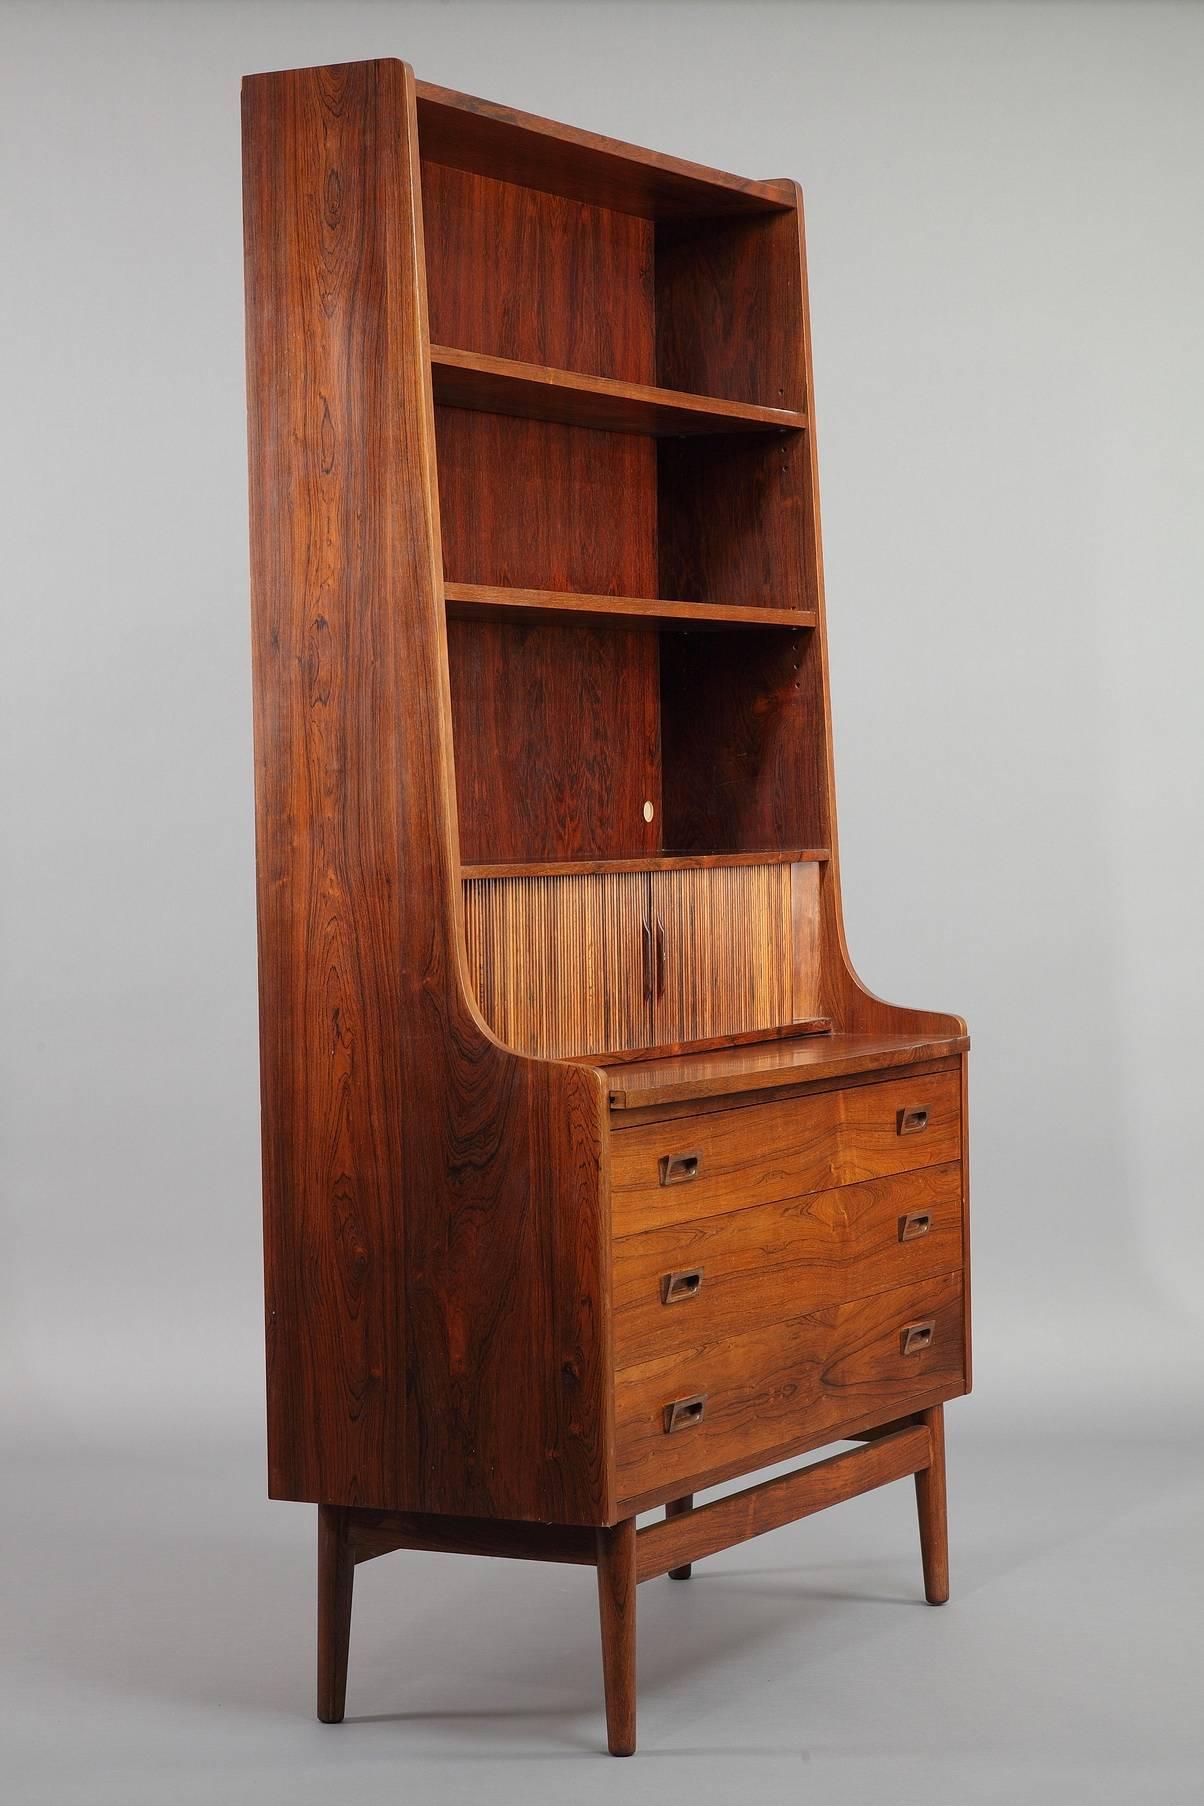 20th Century Rosewood Bookcase by Johannes Sorth 1